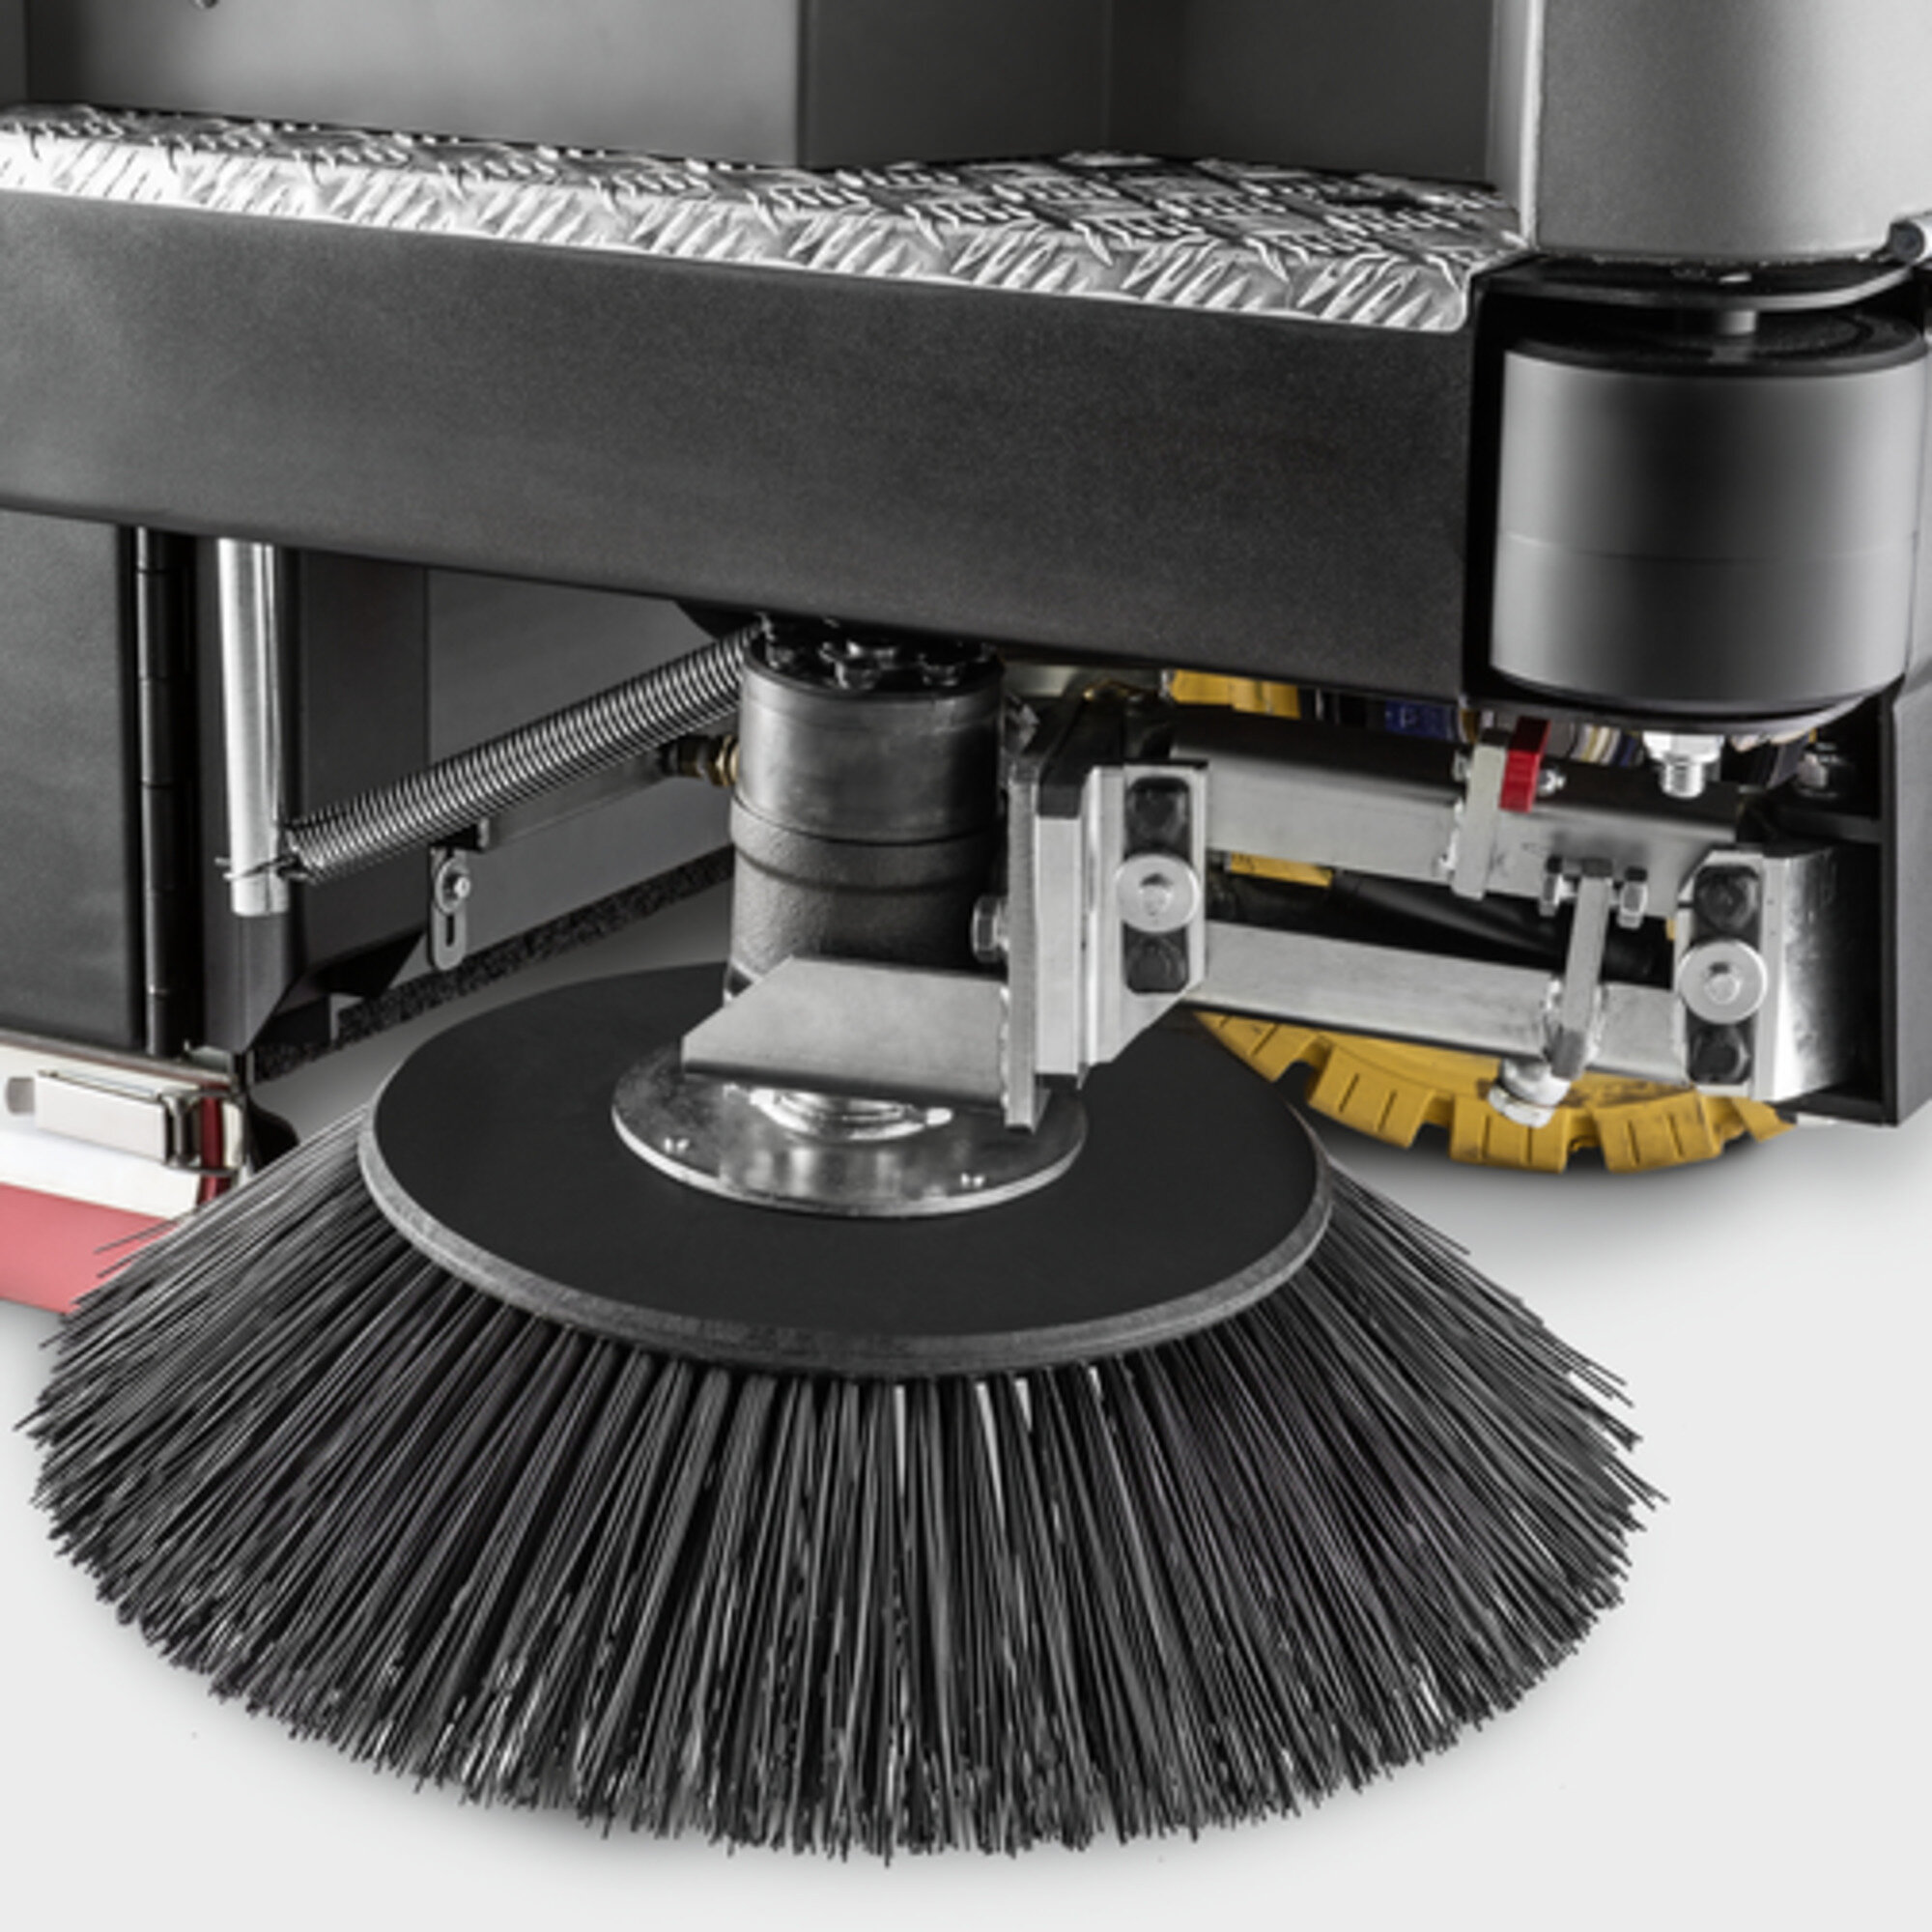 Scrubber drier B 300 R I LPG: Rotatable side brush/side scrubbing deck brushes on both sides of the machine